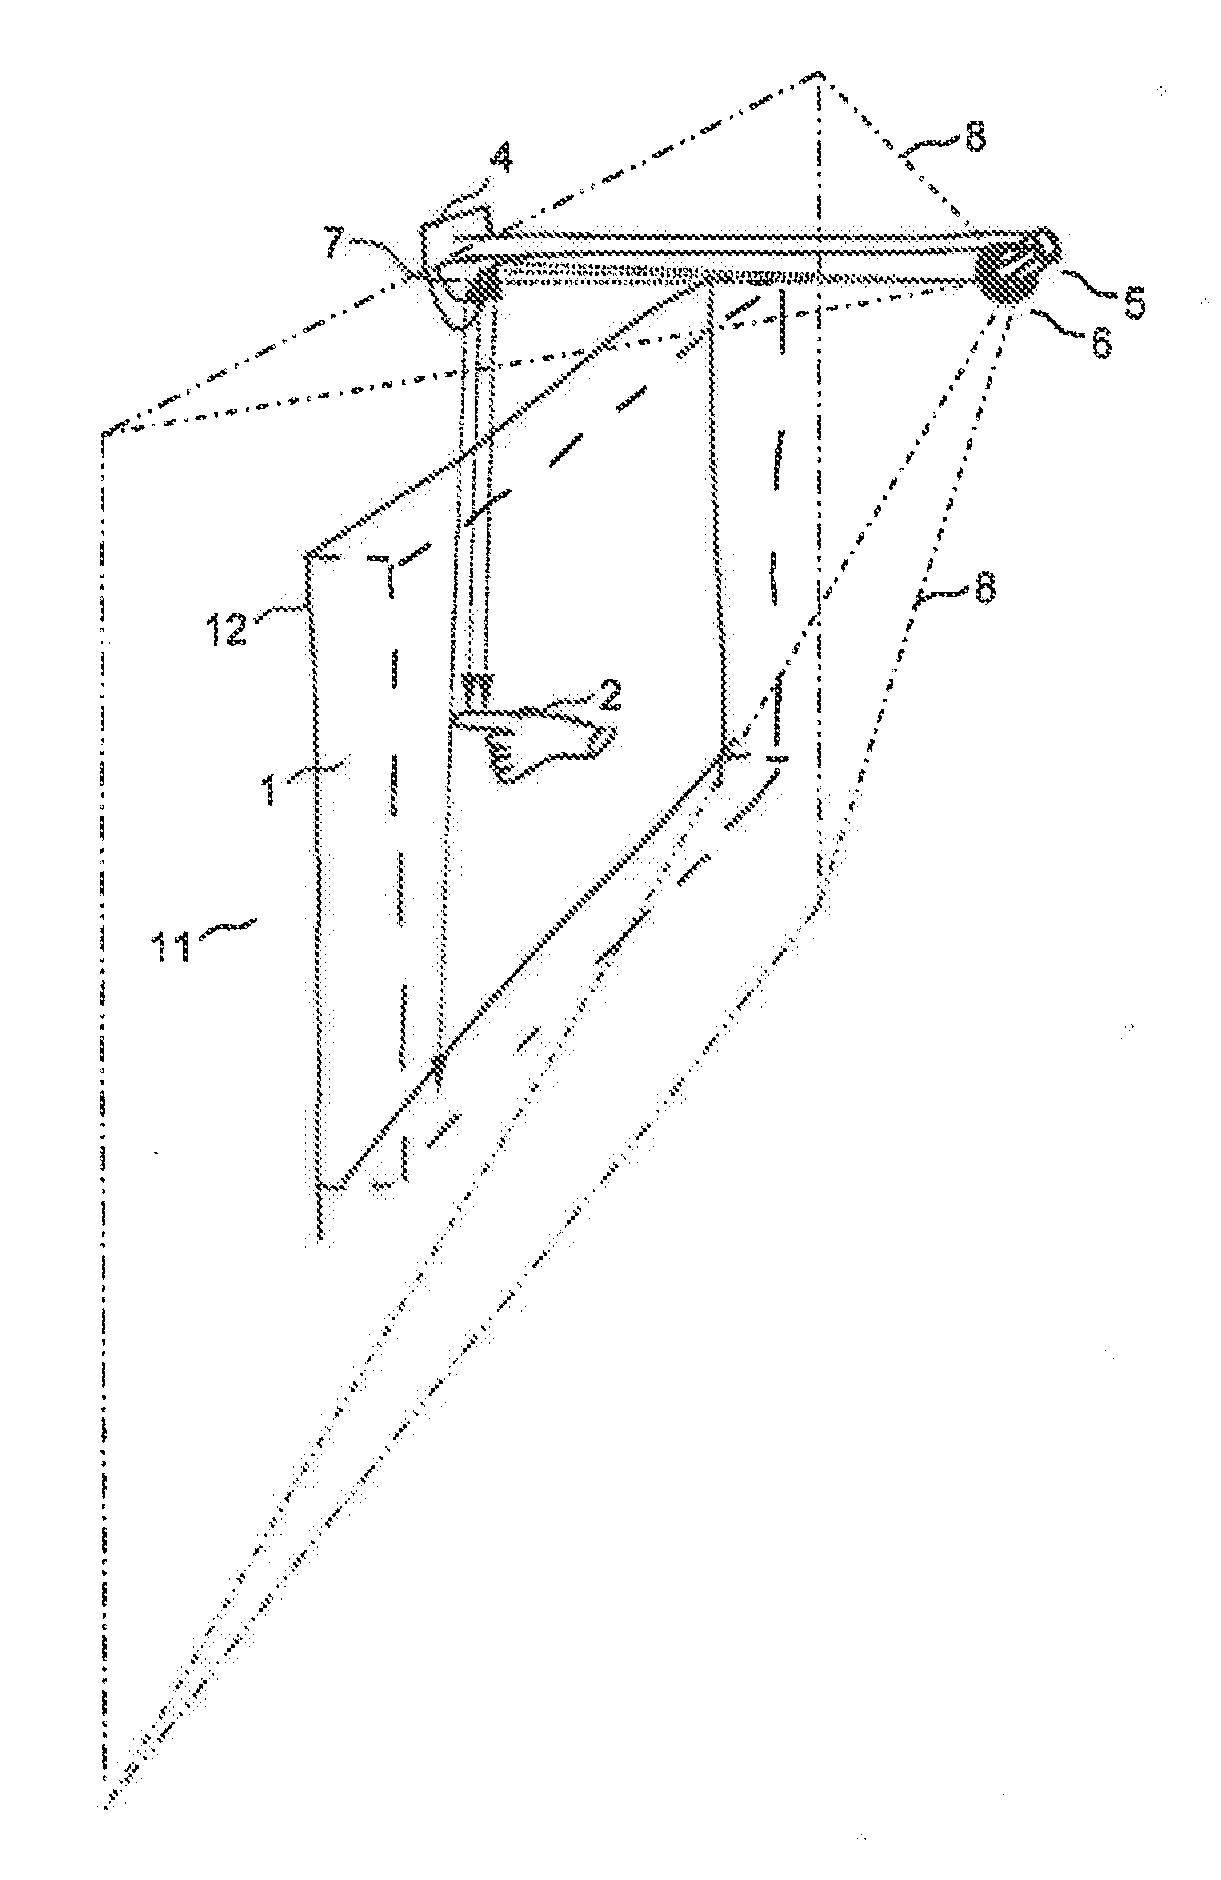 Camera-based multi-touch interaction apparatus, system and method